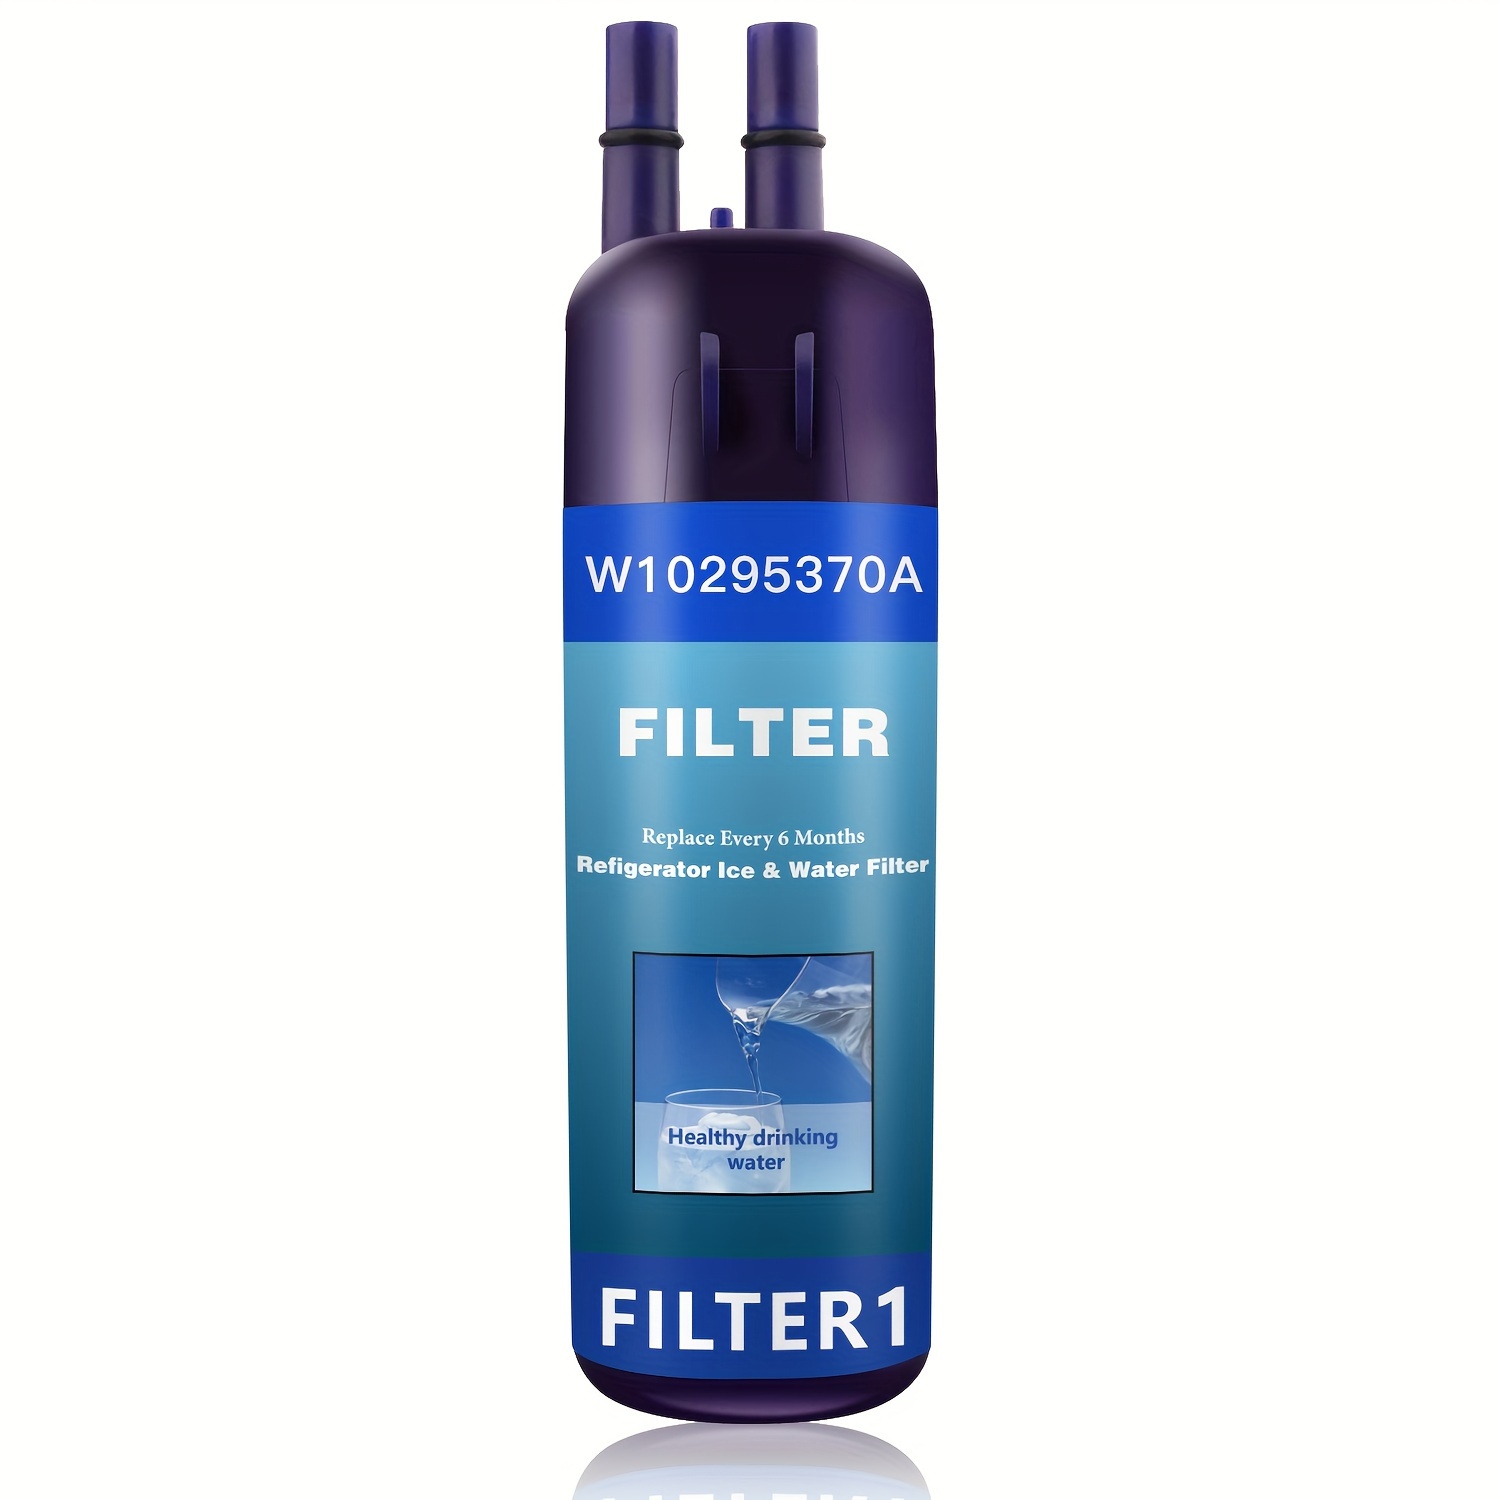 

1pcs Refrigerator Water Filter, Adapted To W10295370a, Edr1rxd1, W10295370, Water Filter For P4rfwb, 46-9081, 46-9930 Water Filter Replacement